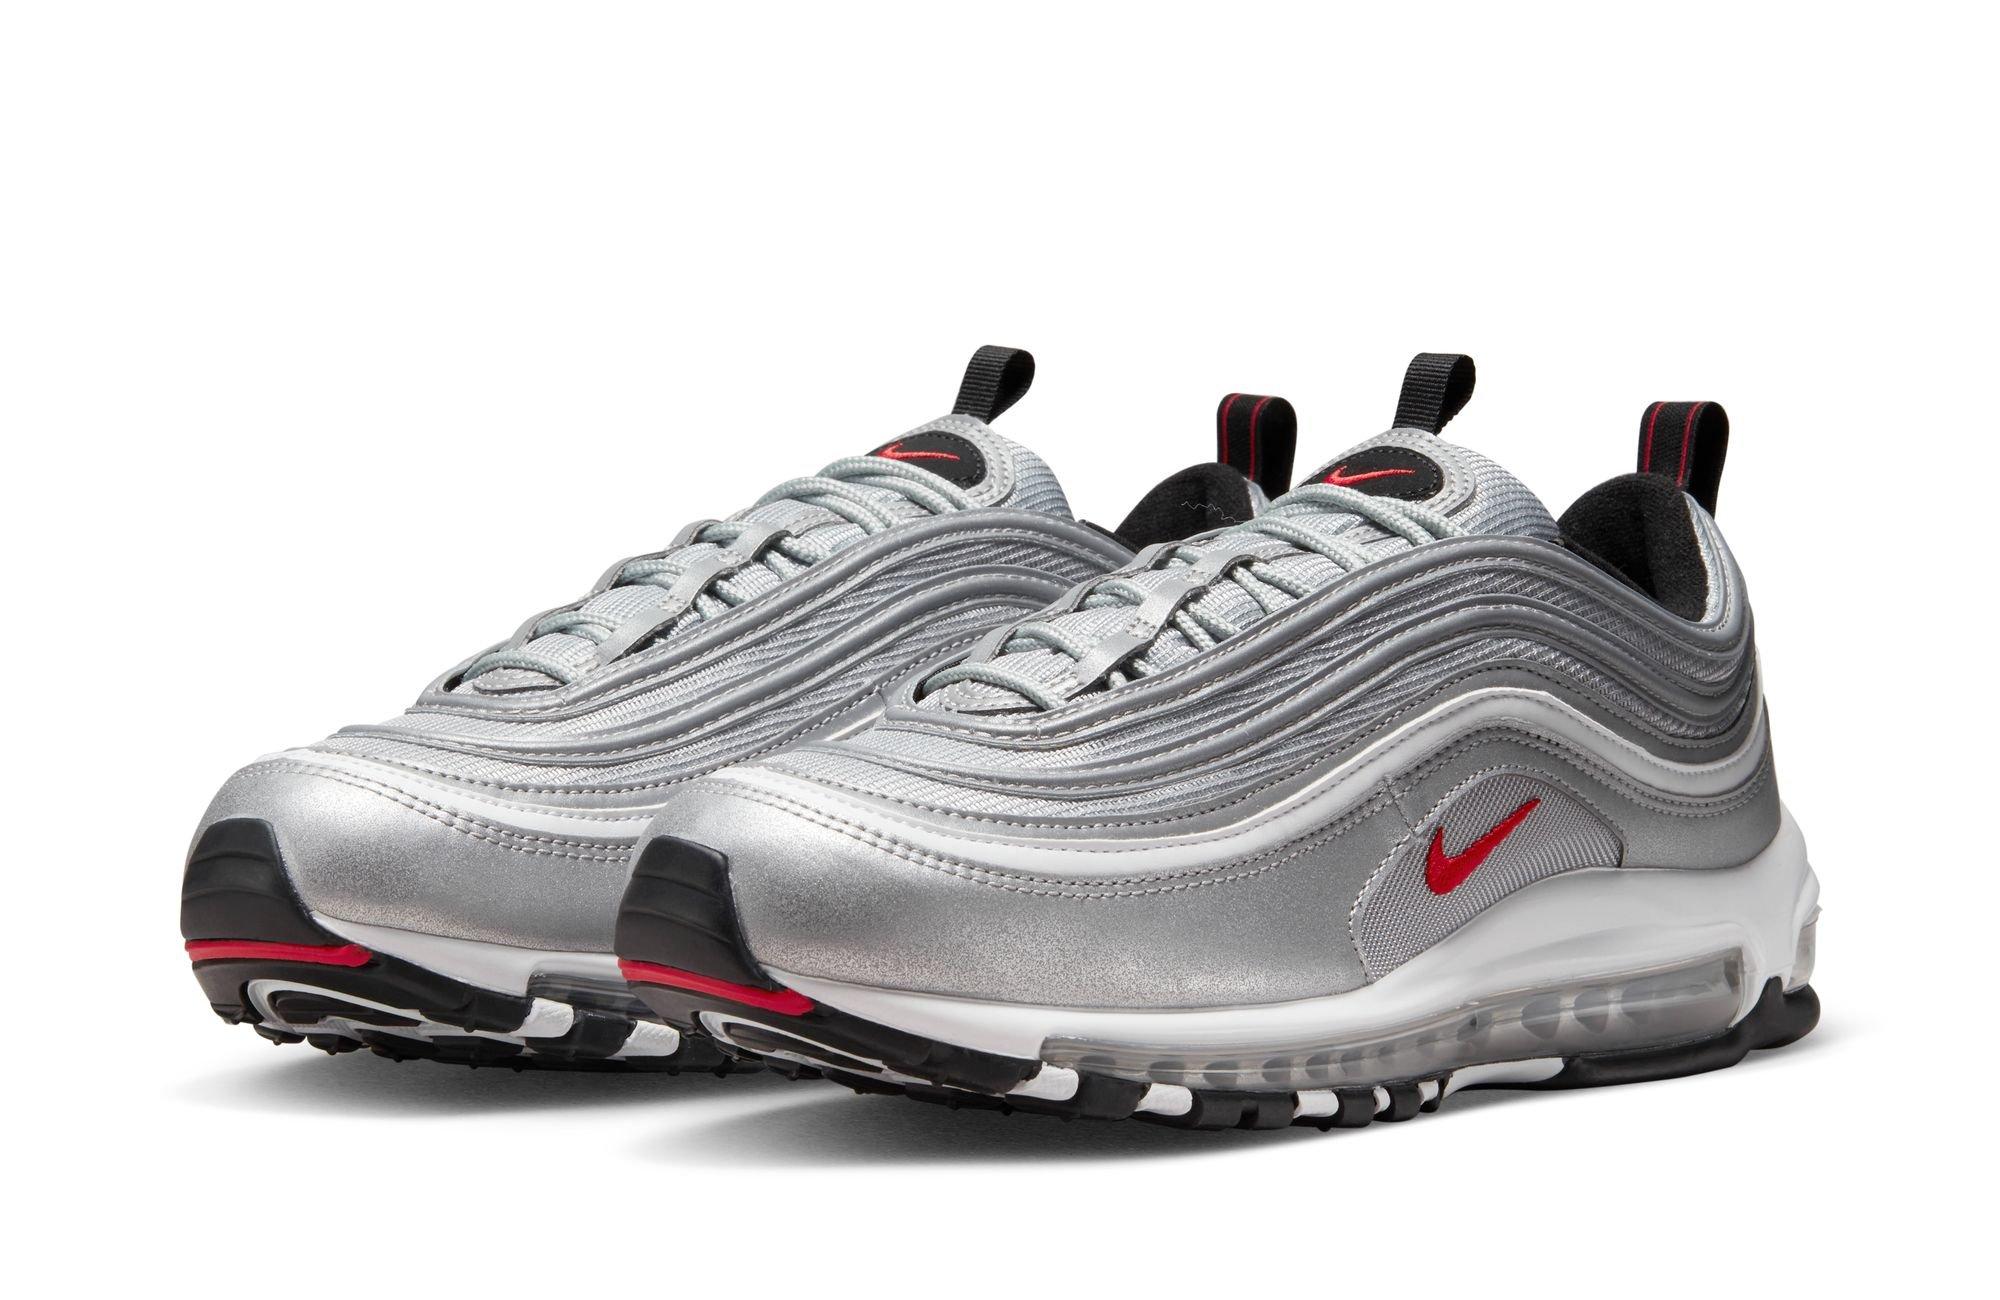 Sneakers Release &#8211; Nike Air Max 97 &#8220;Metallic Red/Black&#8221; ​Men&#8217;s, Women&#8217;s &#038; Shoes Dropping 11/11